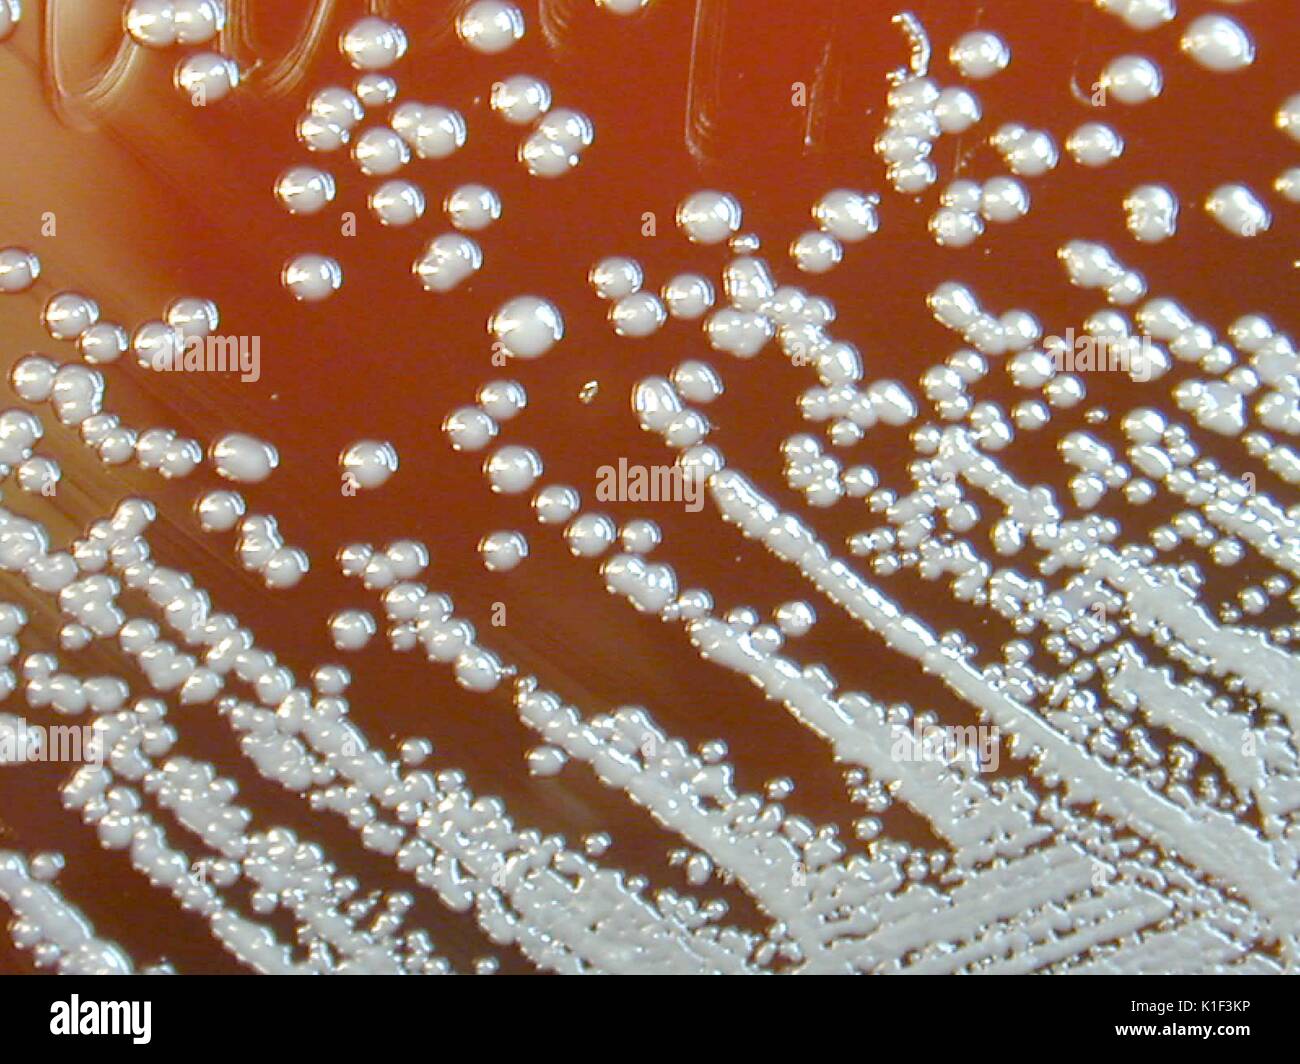 Burkholderia pseudomallei grown on sheep blood agar for 48 hours. Burkholderia pseudomallei is a Gram-negative aerobic bacteria, and is the causative agent of melioidosis. The organism's colonial morphology changes somewhat as the incubation is extended. Image courtesy CDC/Courtesy of Larry Stauffer, Oregon State Public Health Laboratory, 2002. Stock Photo